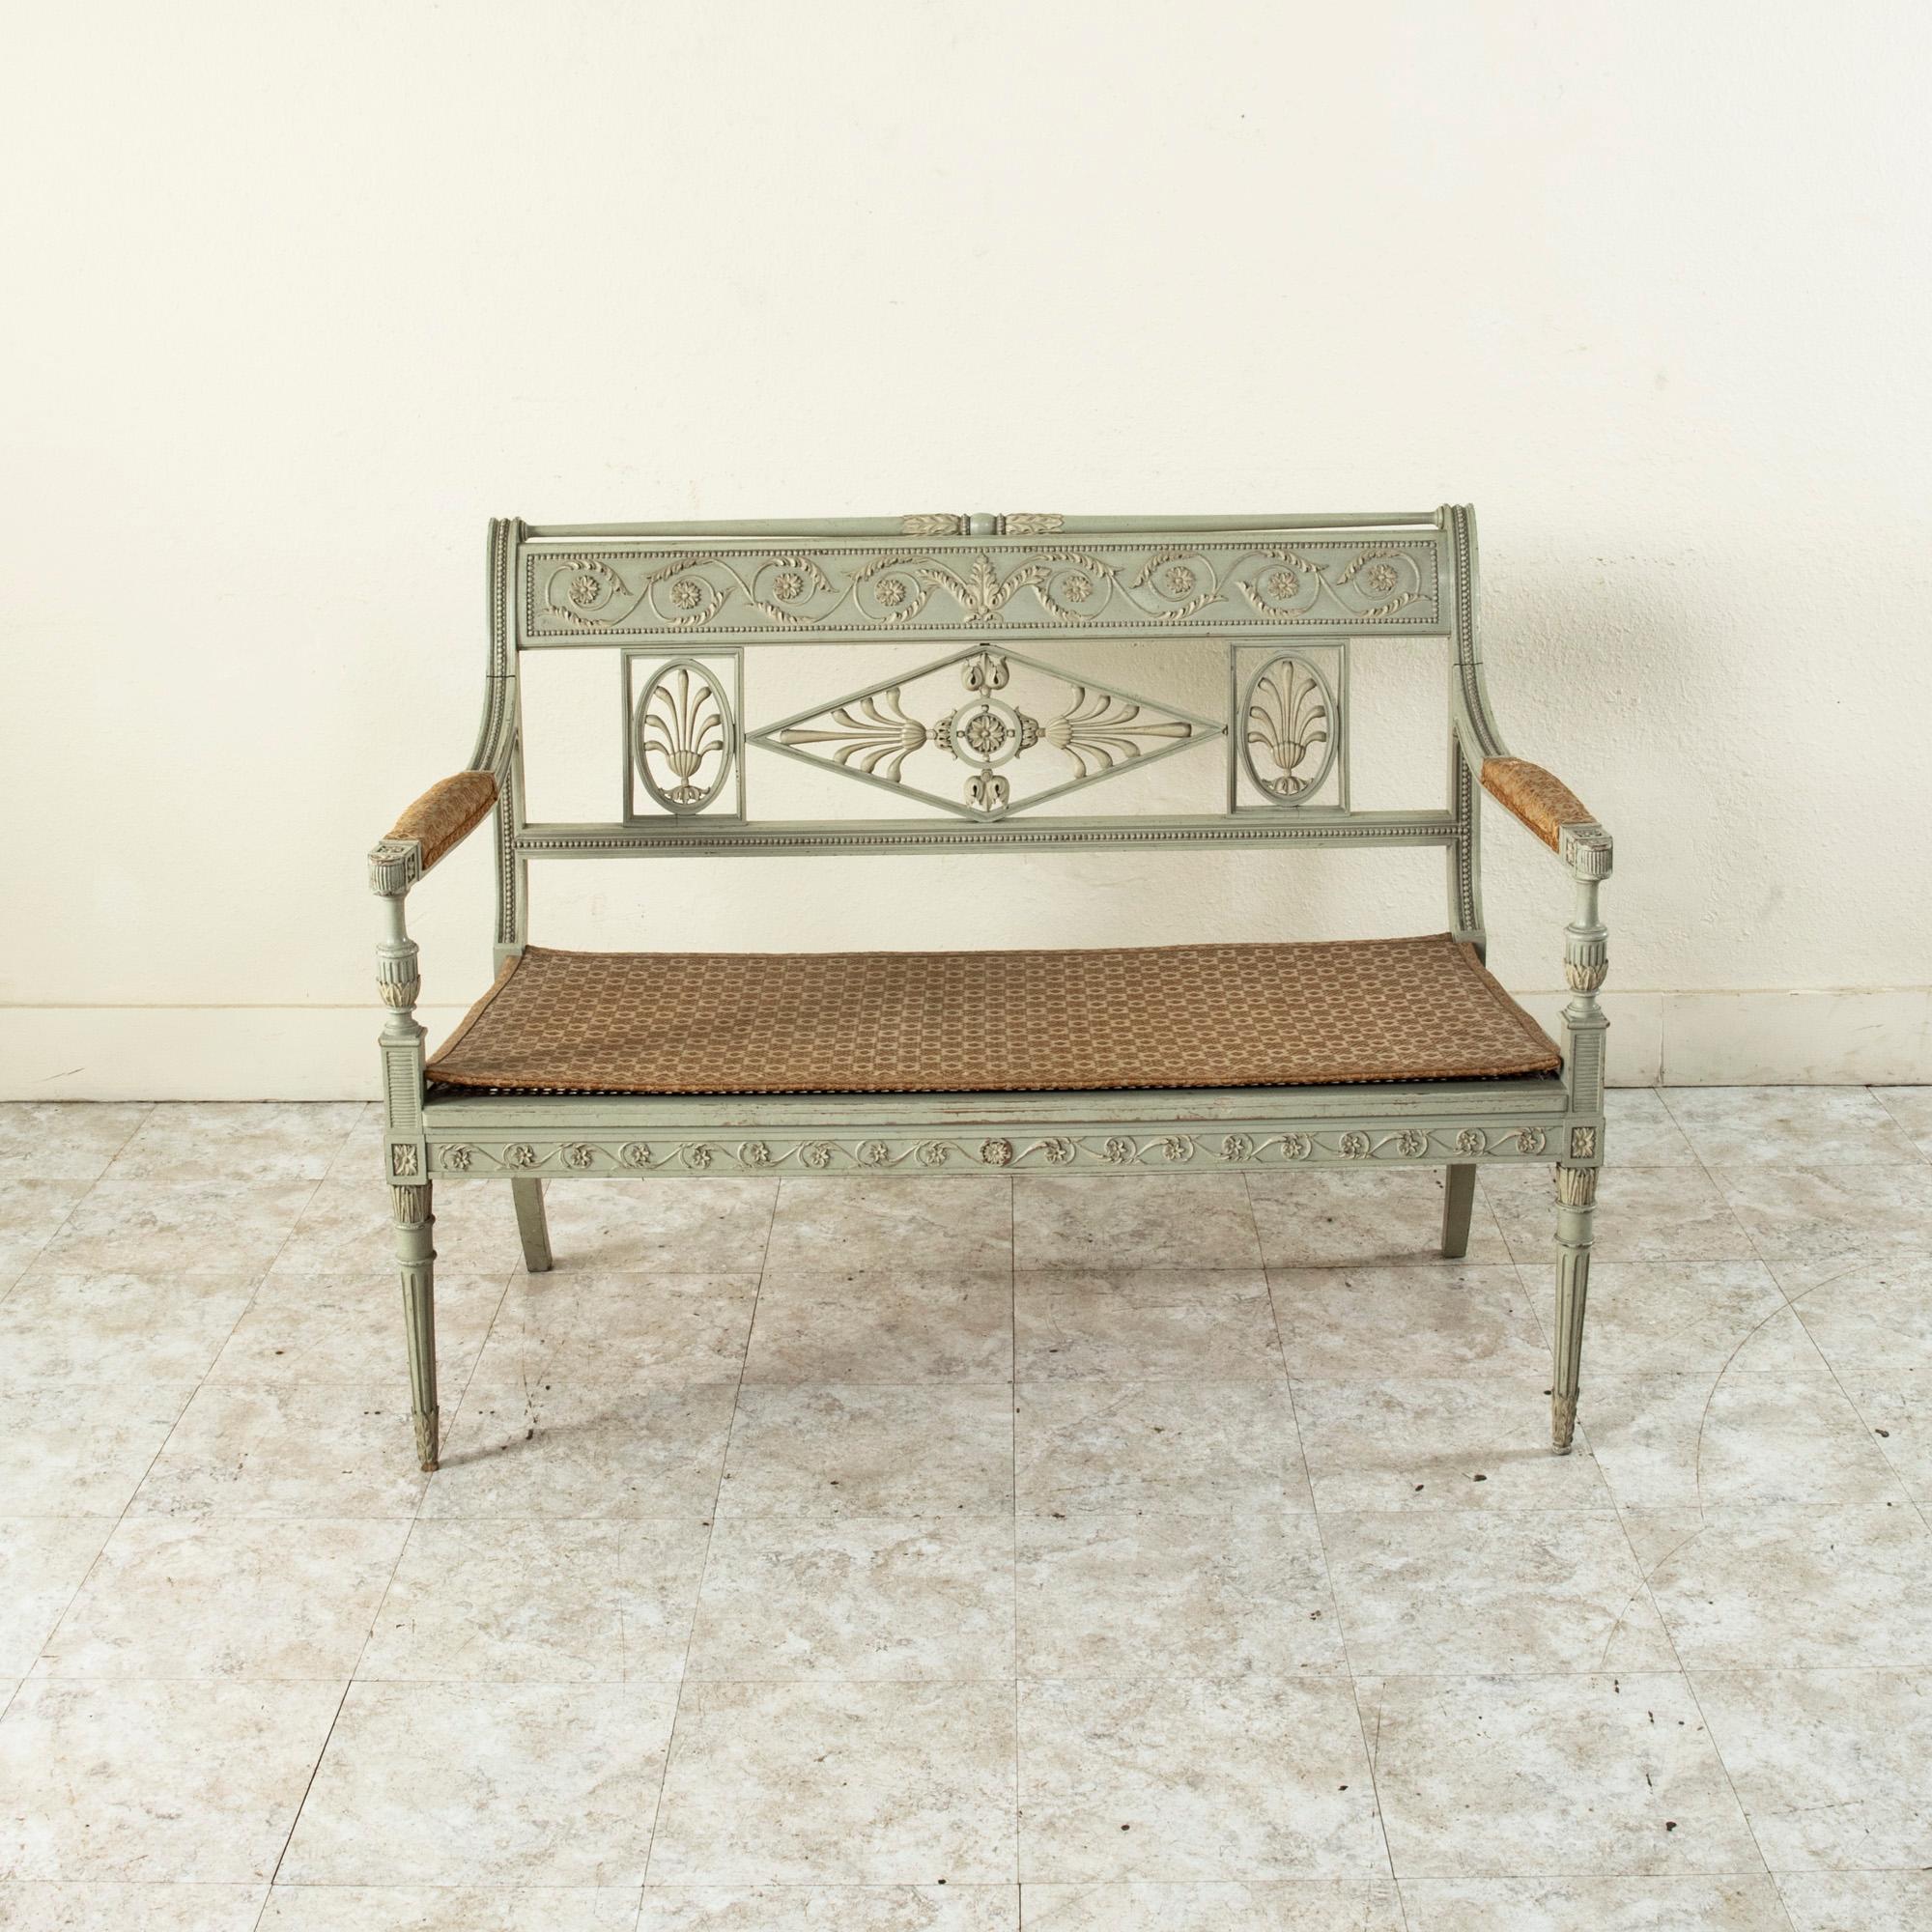 This French Directoire style banquette from the turn of the twentieth century features a scrolled seat back detailed with a carved central rosette flanked by palmettes within a classic diamond shape. The seat back is additionally detailed with